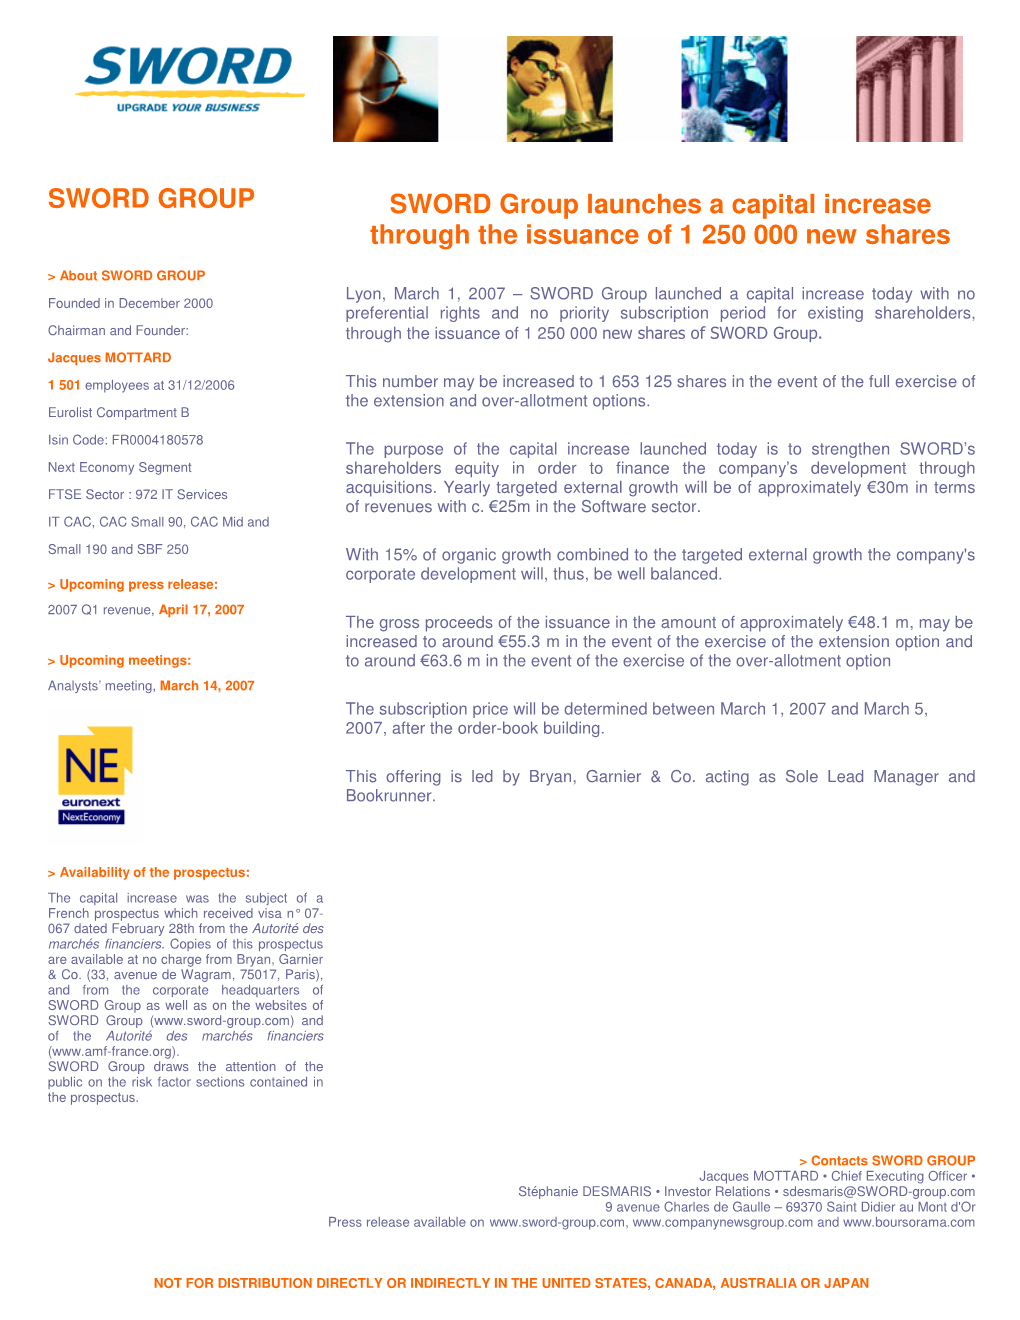 SWORD Group Launches a Capital Increase Through the Issuance of 1